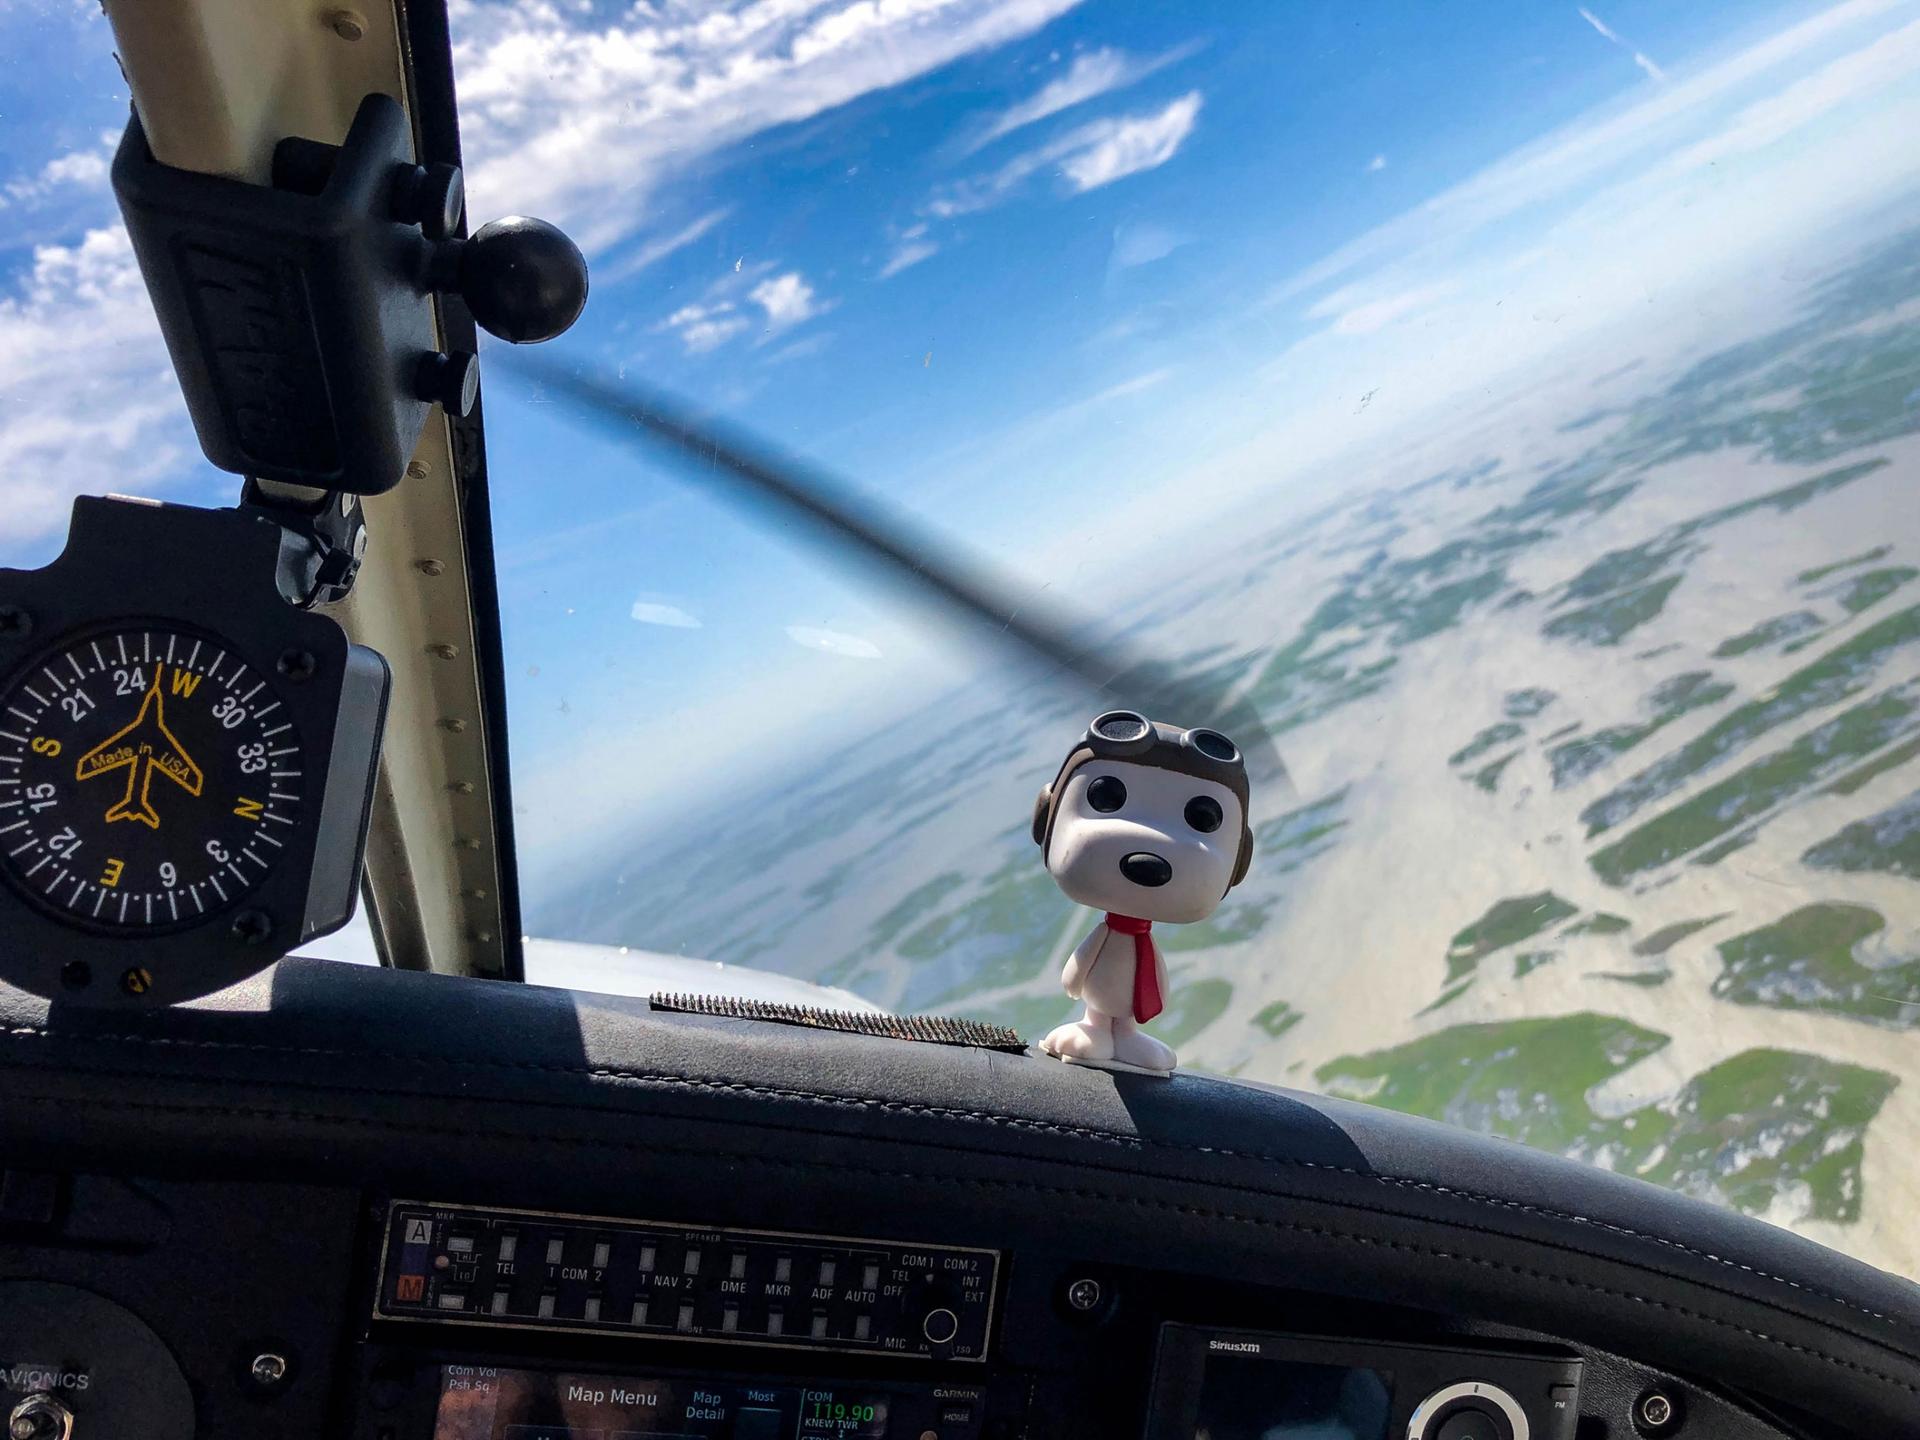 A figurine of Snoopy is shown on the dashboard of four-seat plane with aviator attire.